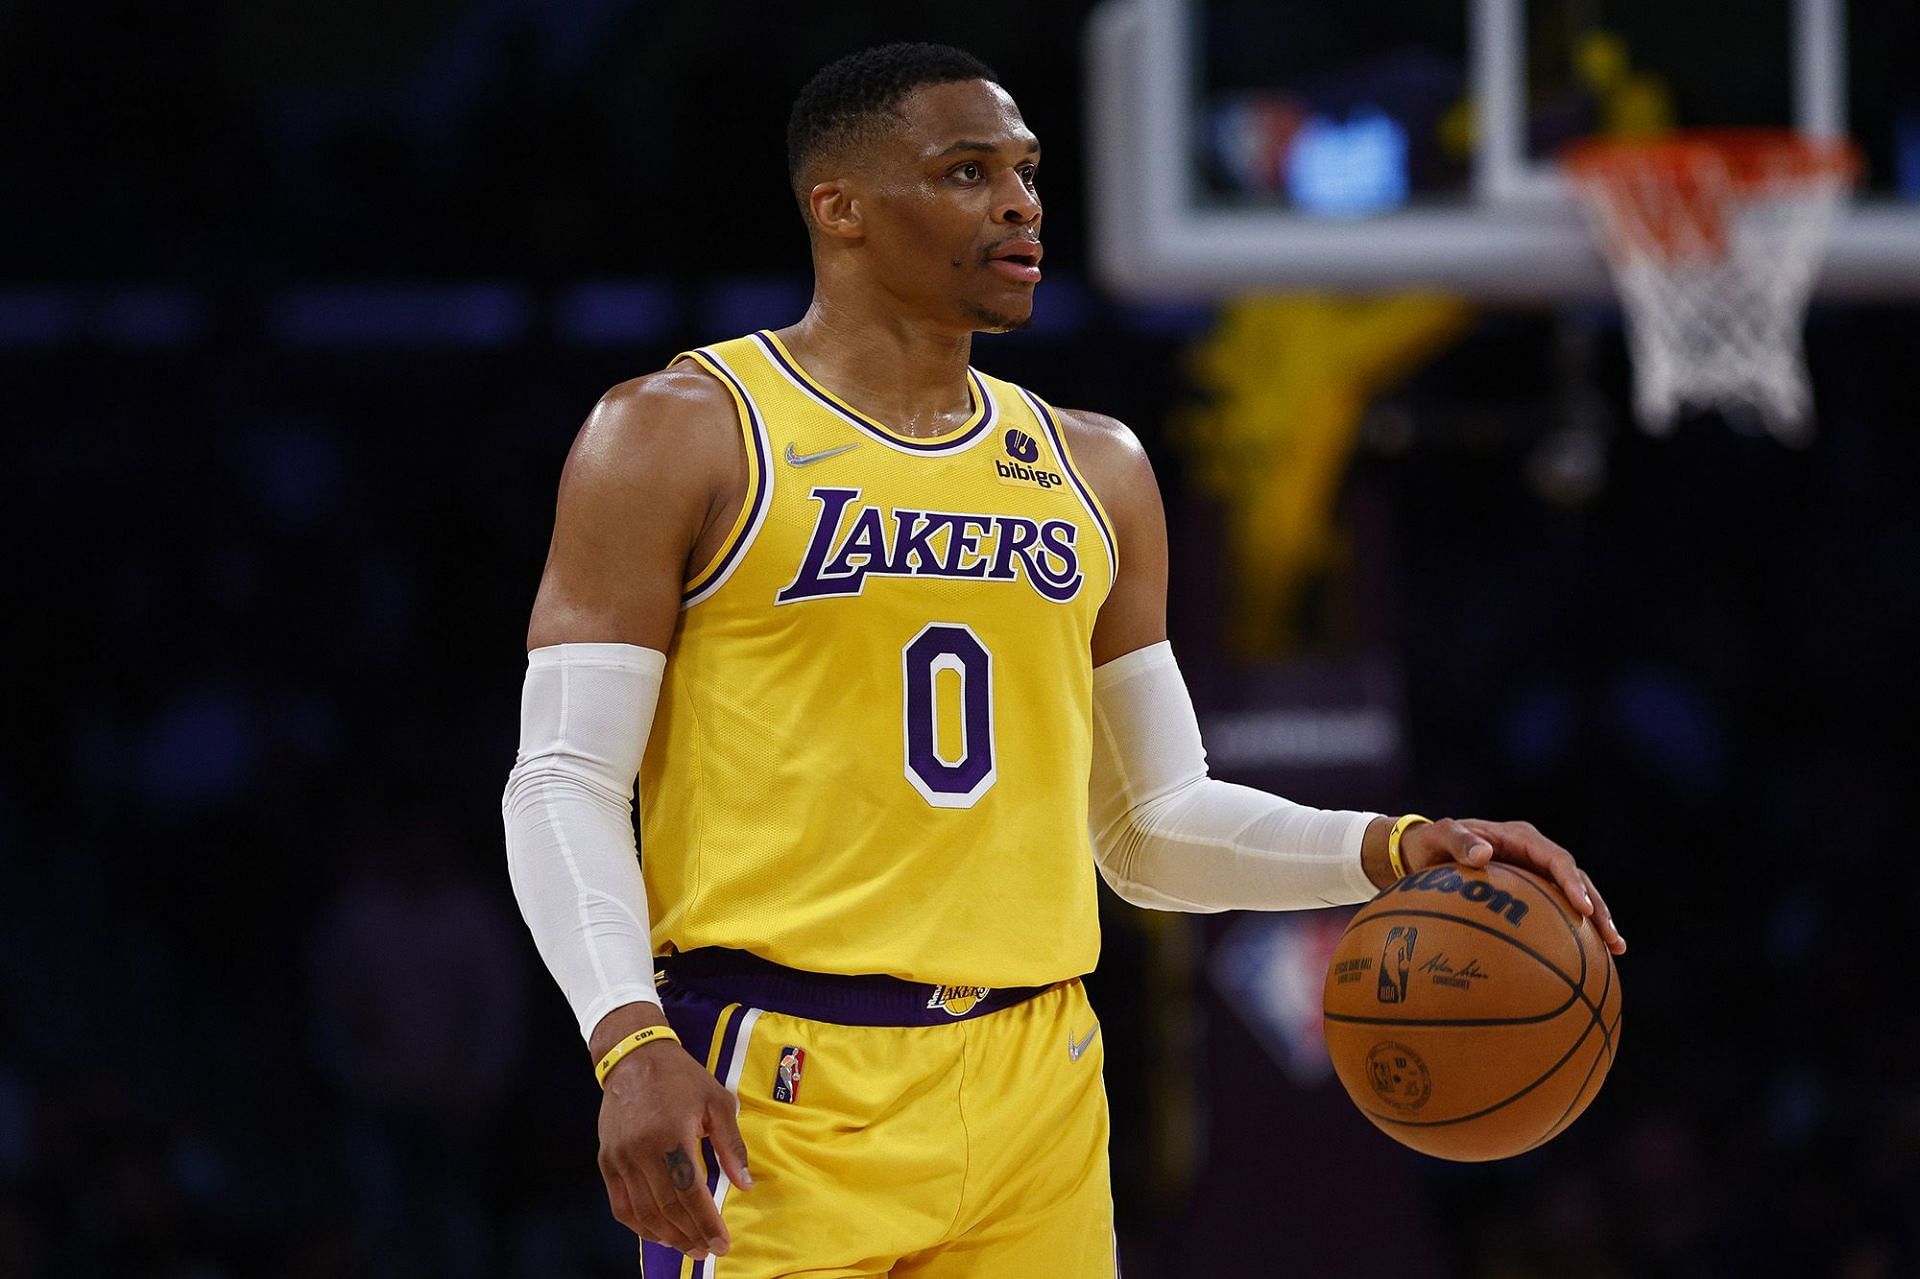 The LA Lakers and Laker Nation expect great things from their $44 million man. [Photo: New York Post]